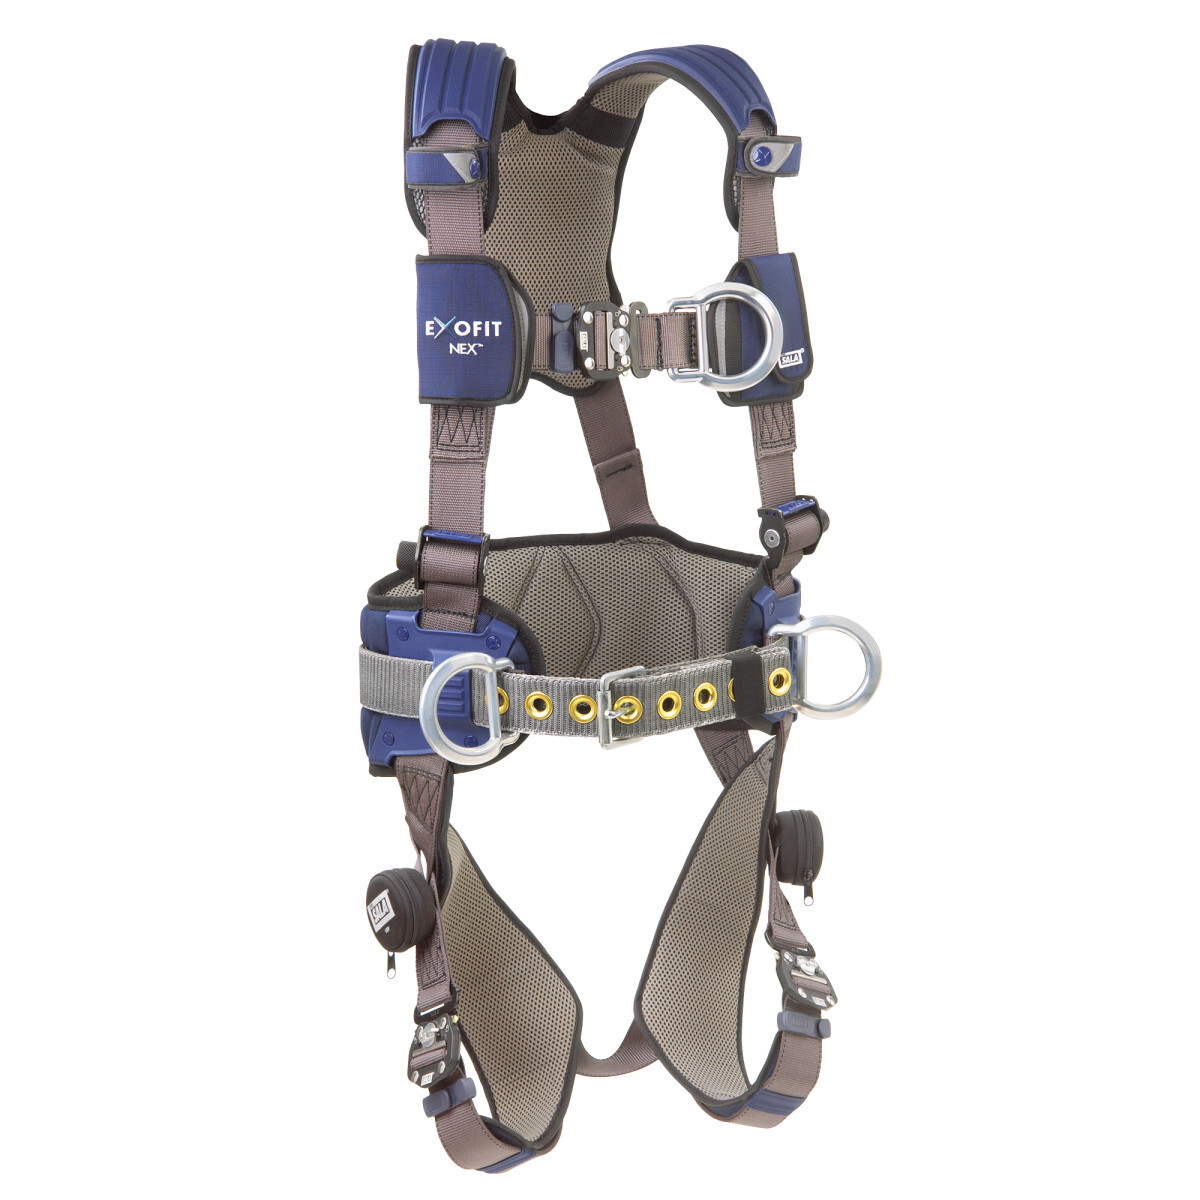 3M™ DBI-SALA® 2X ExoFit NEX™ Construction/Full Body Style Harness With Tech-Lite™ Aluminum Back, Front And Side D-Ring, Duo-Lok™